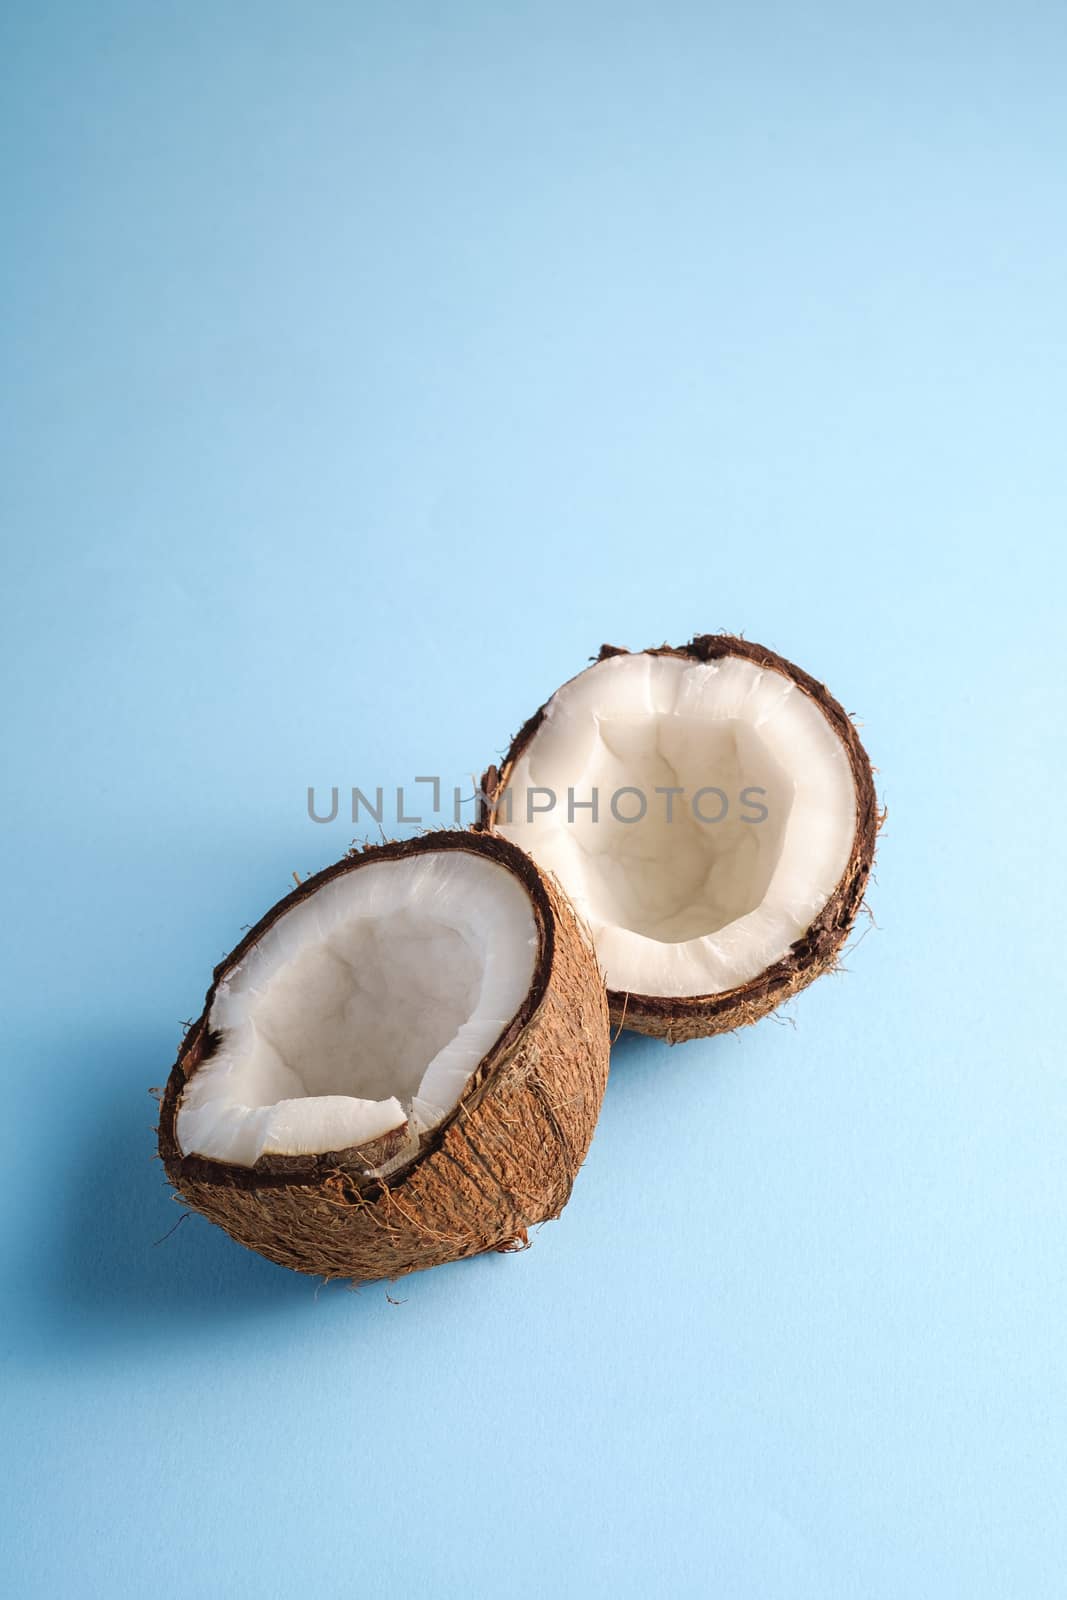 Coconut fruits on blue vibrant plain background by Frostroomhead